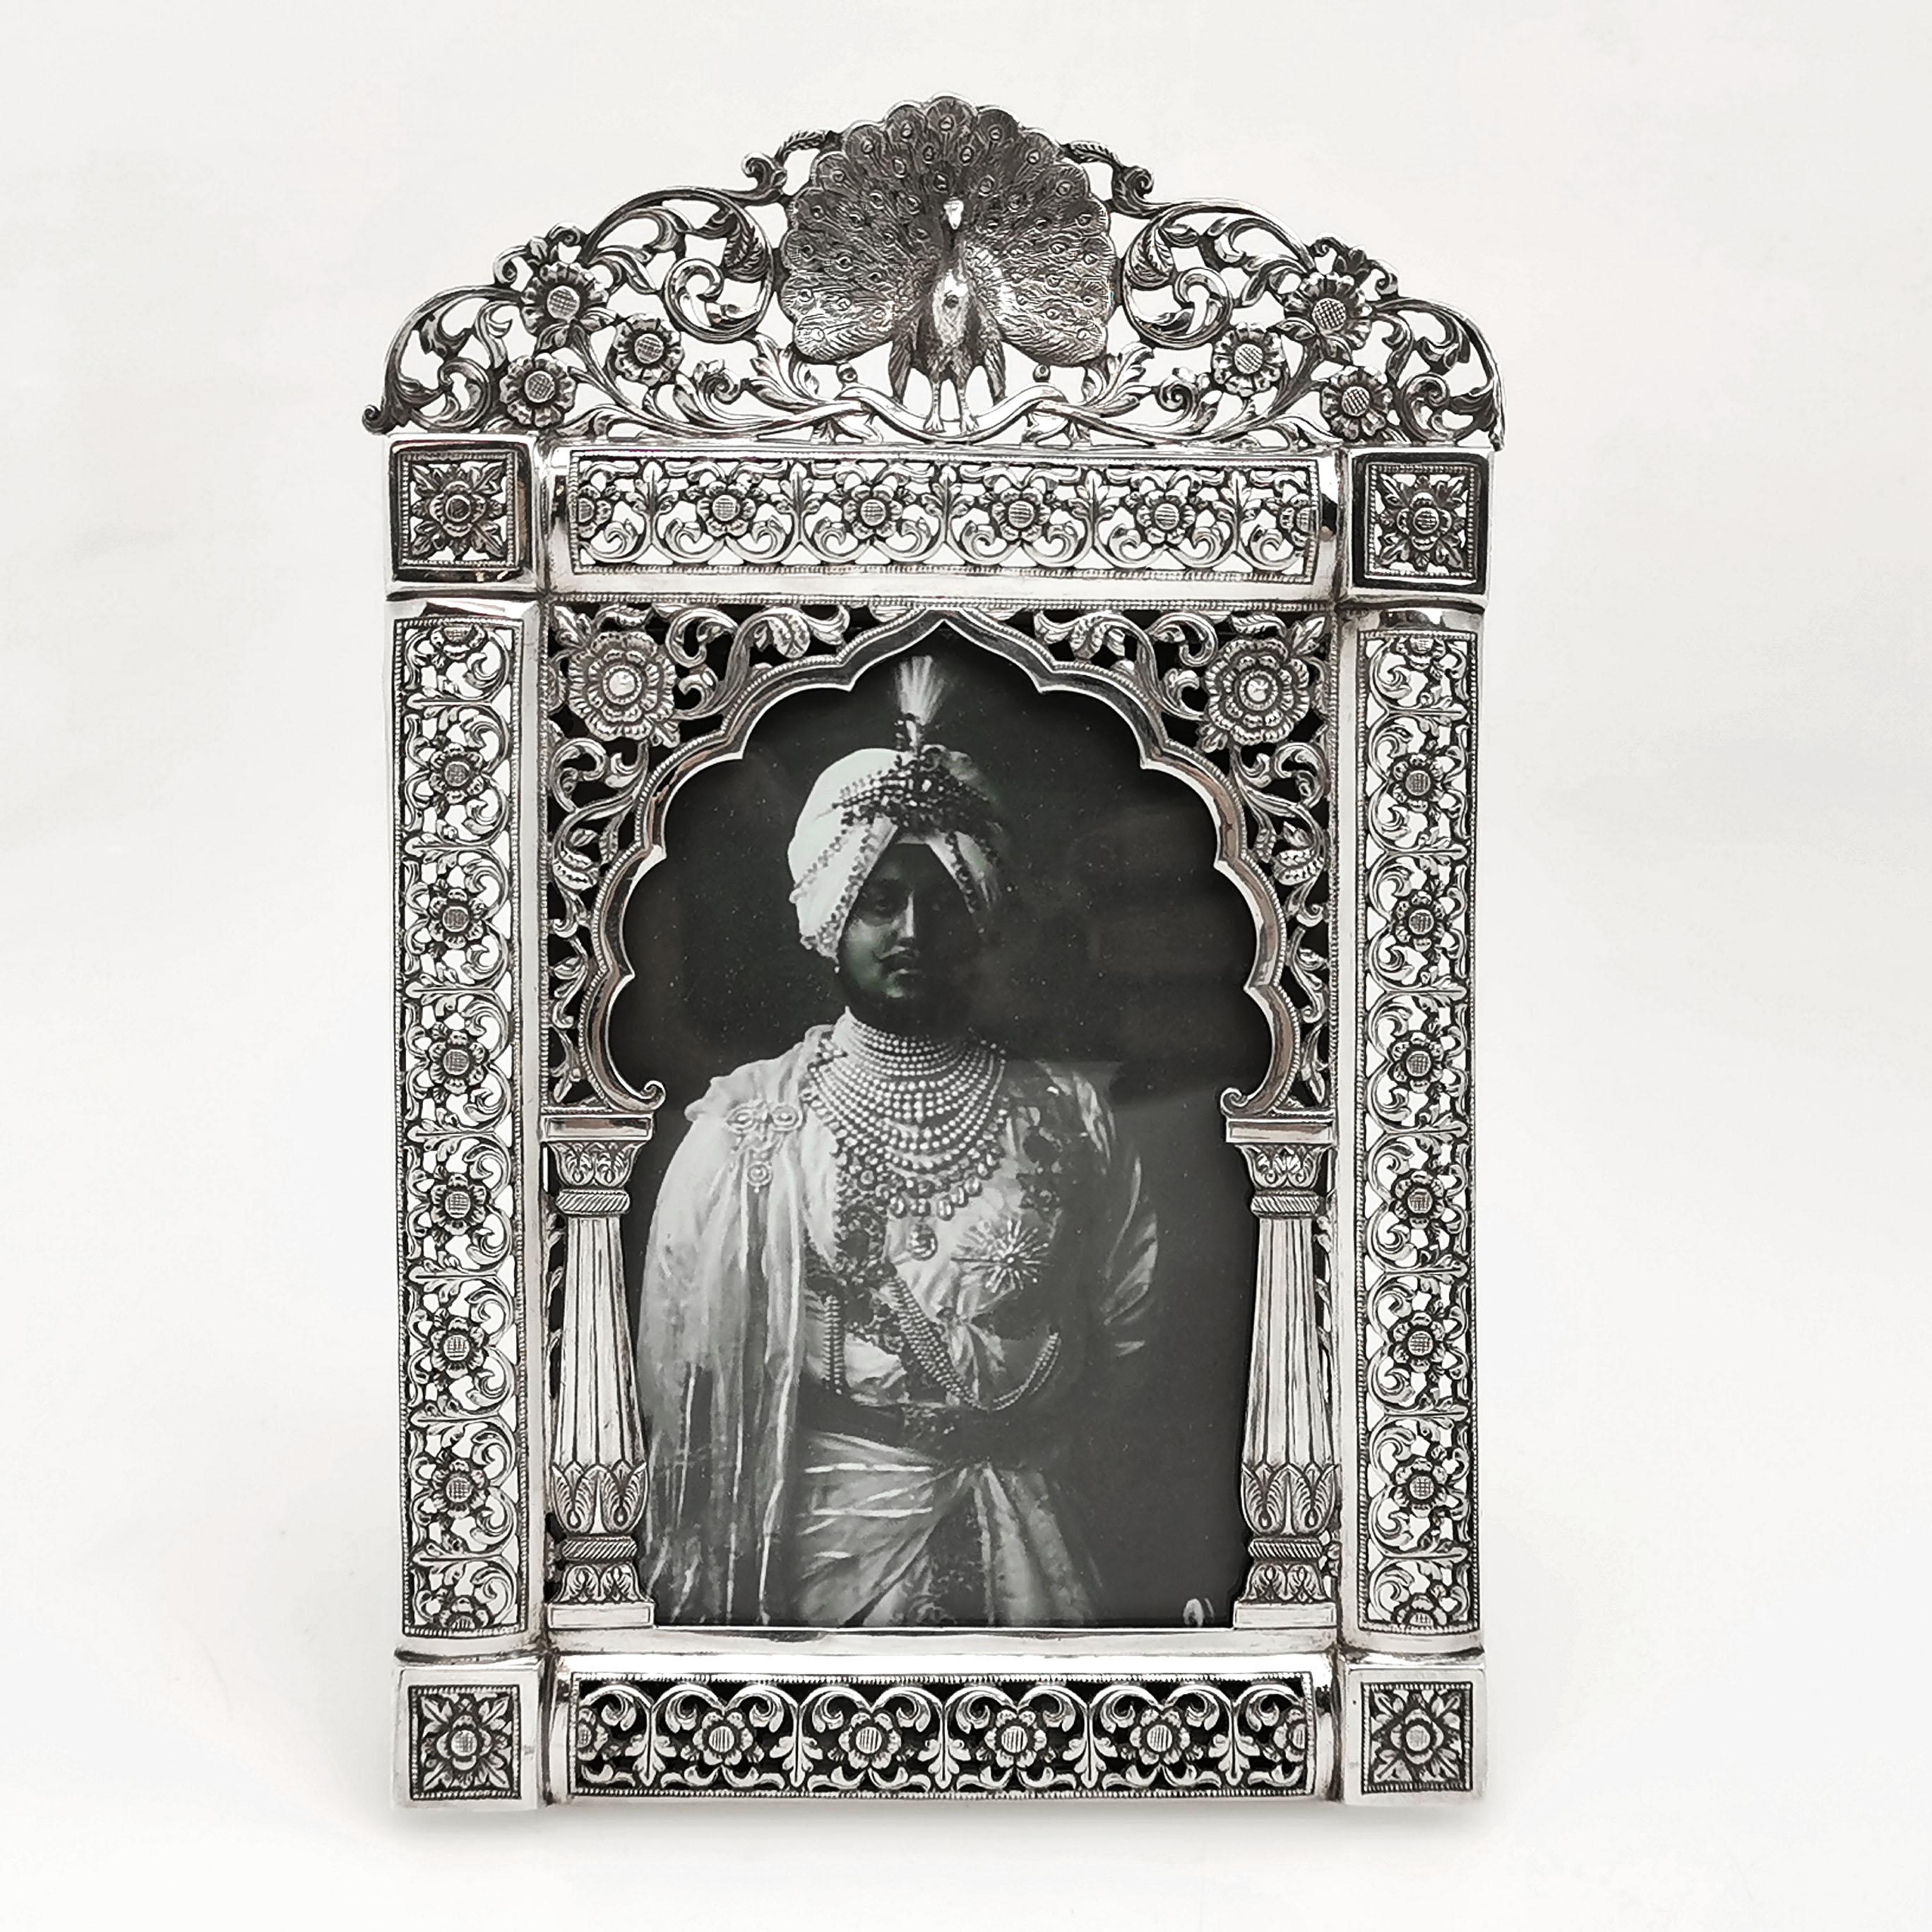 A beautiful antique Indian silver photograph frame. This picture frame is embellished with a delicate chased and pierced design showing stylised flowers and topped with a peacock.

Made in Bhuj Kutch, India in circa 1880 by Oomersee